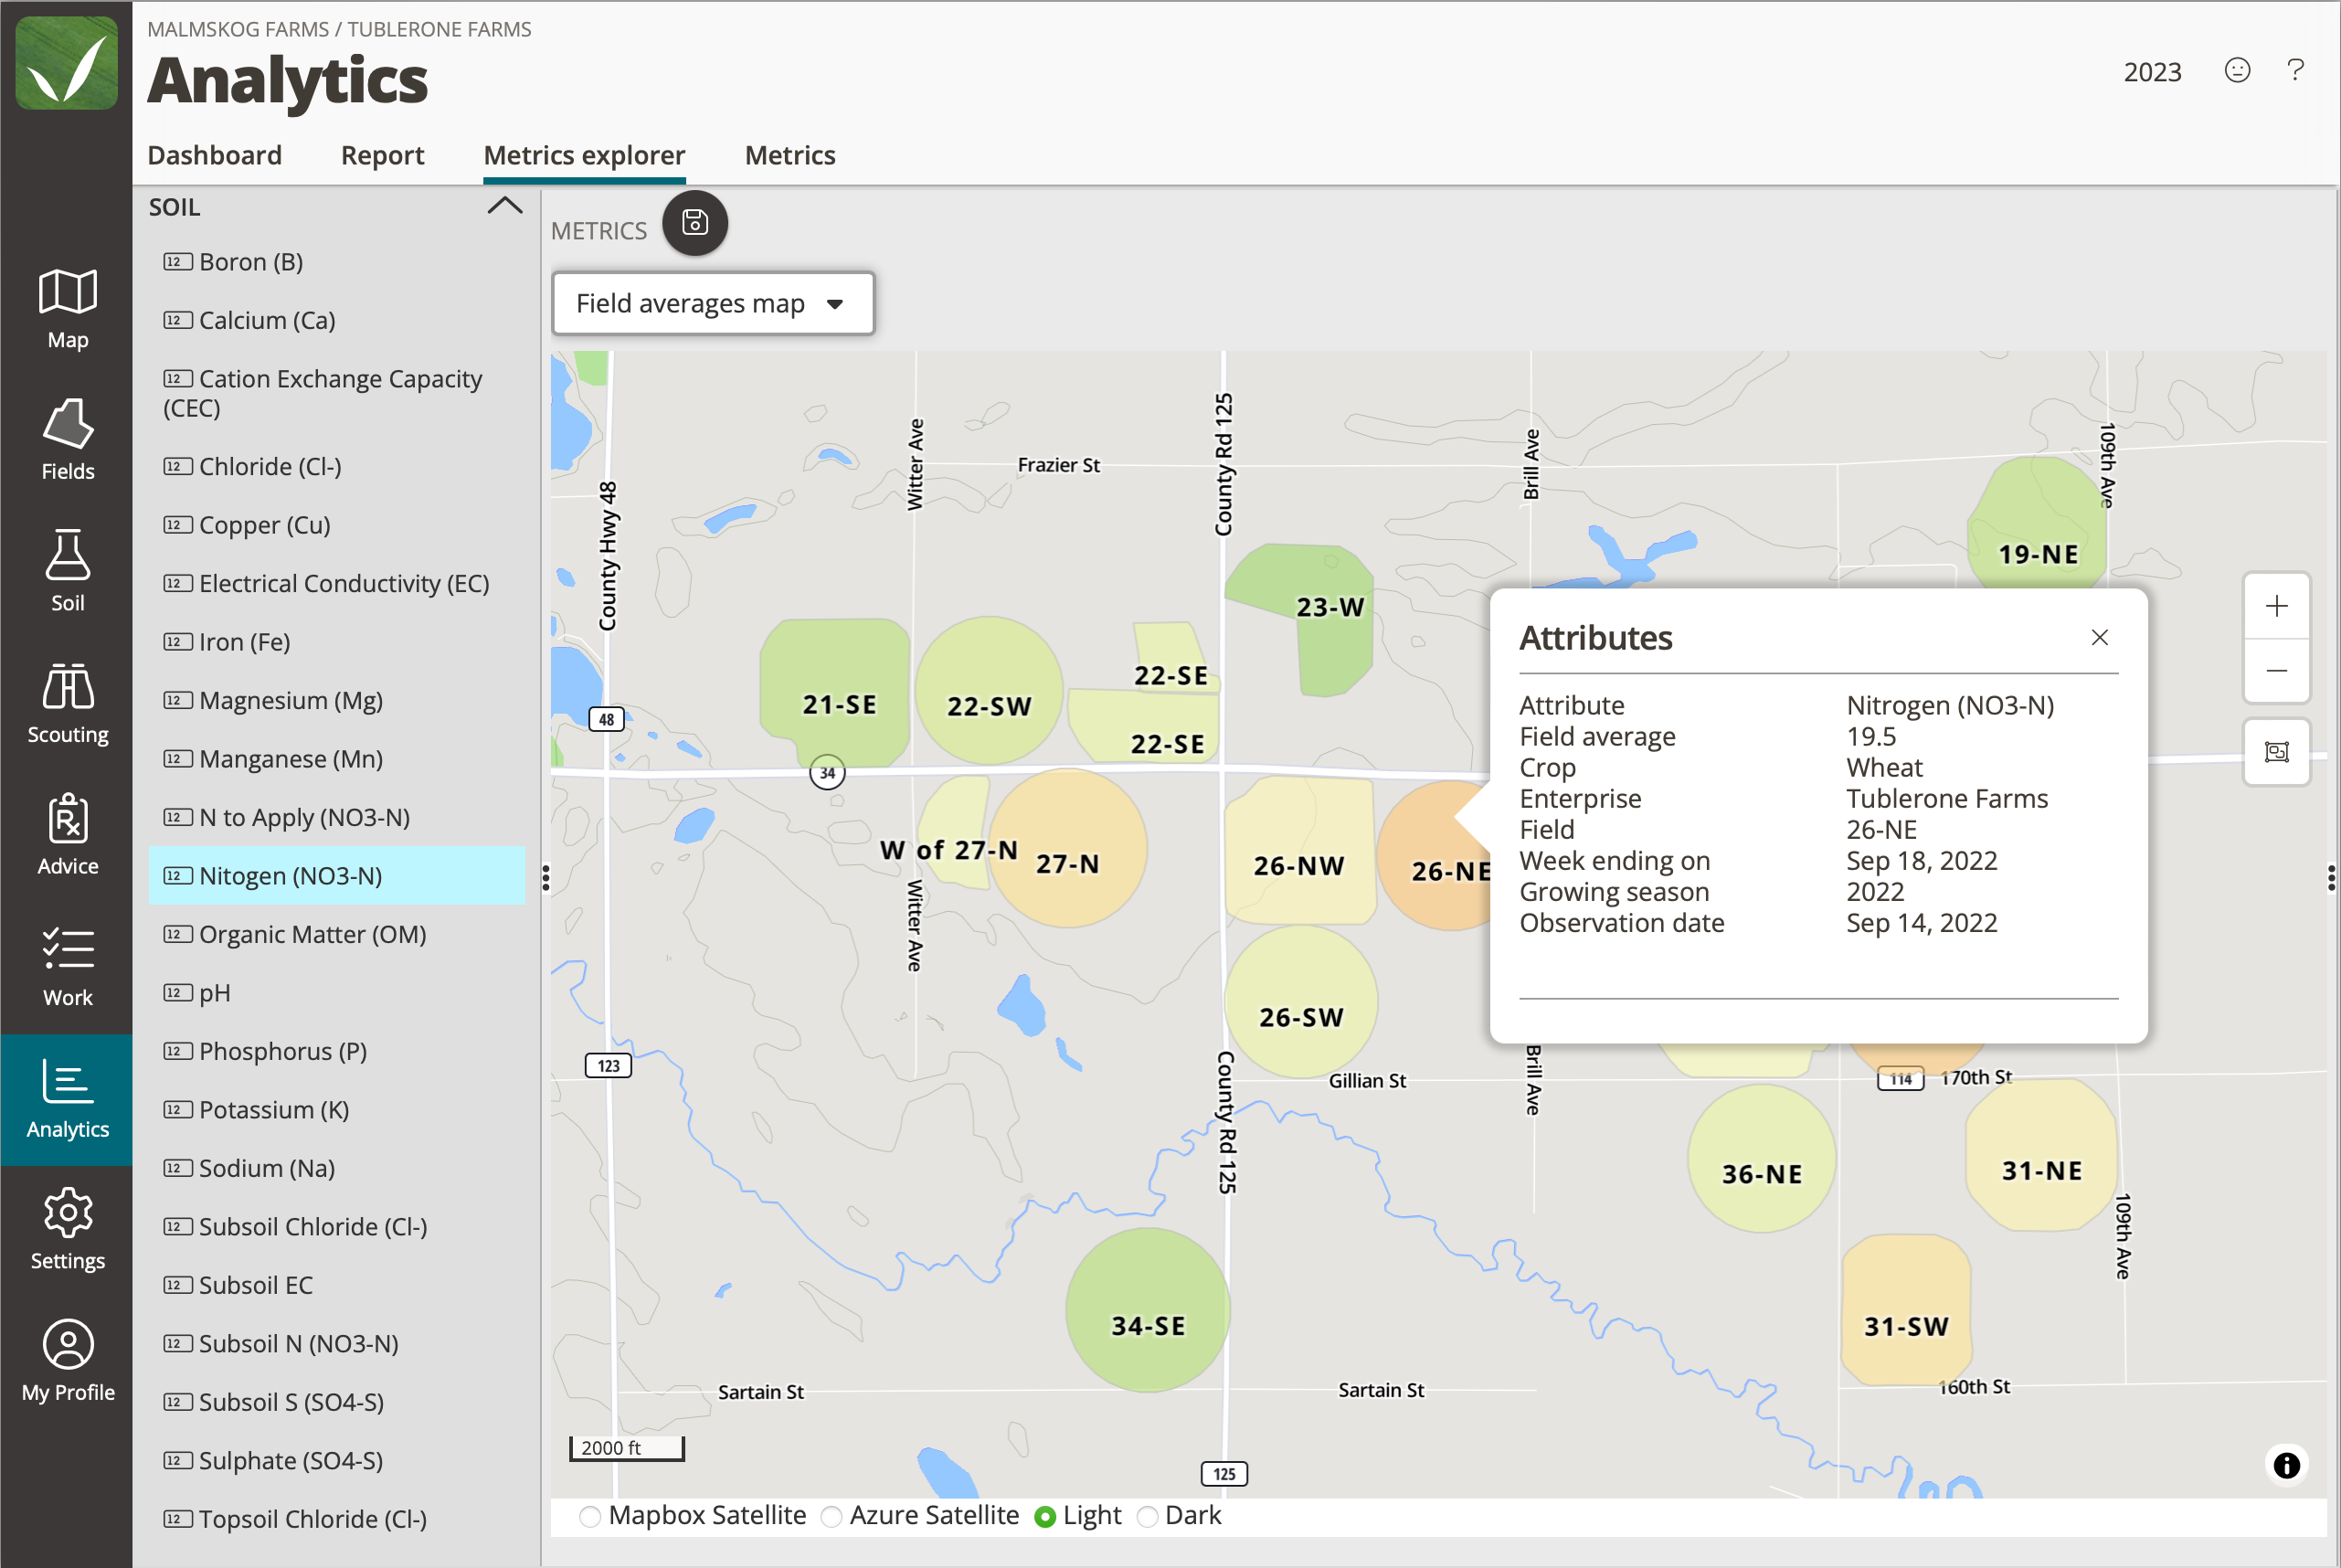 A screenshot of FarmQA showing the analytics metric view of soil sample results across multiple fields, color coded by the average amount of Nitrogen found in the soil sample